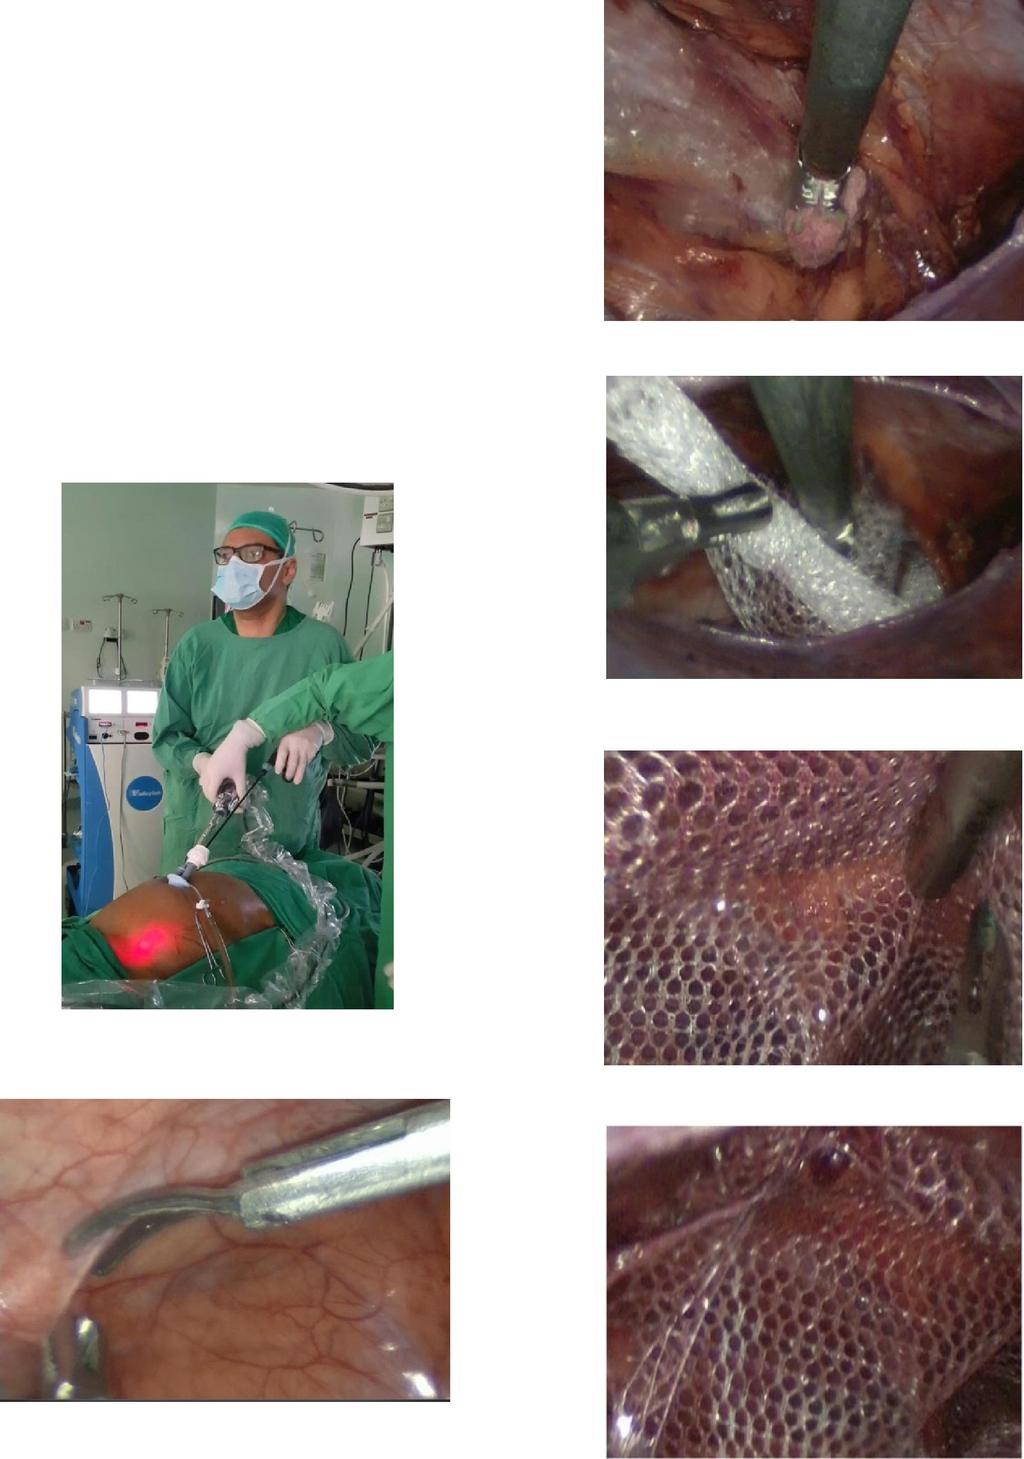 The patient was placed in a 30 Trendelenburg position, which caused the small bowel loop to move up and allowed for complete visualization of the surgical field with 5 mm, 30 scope.